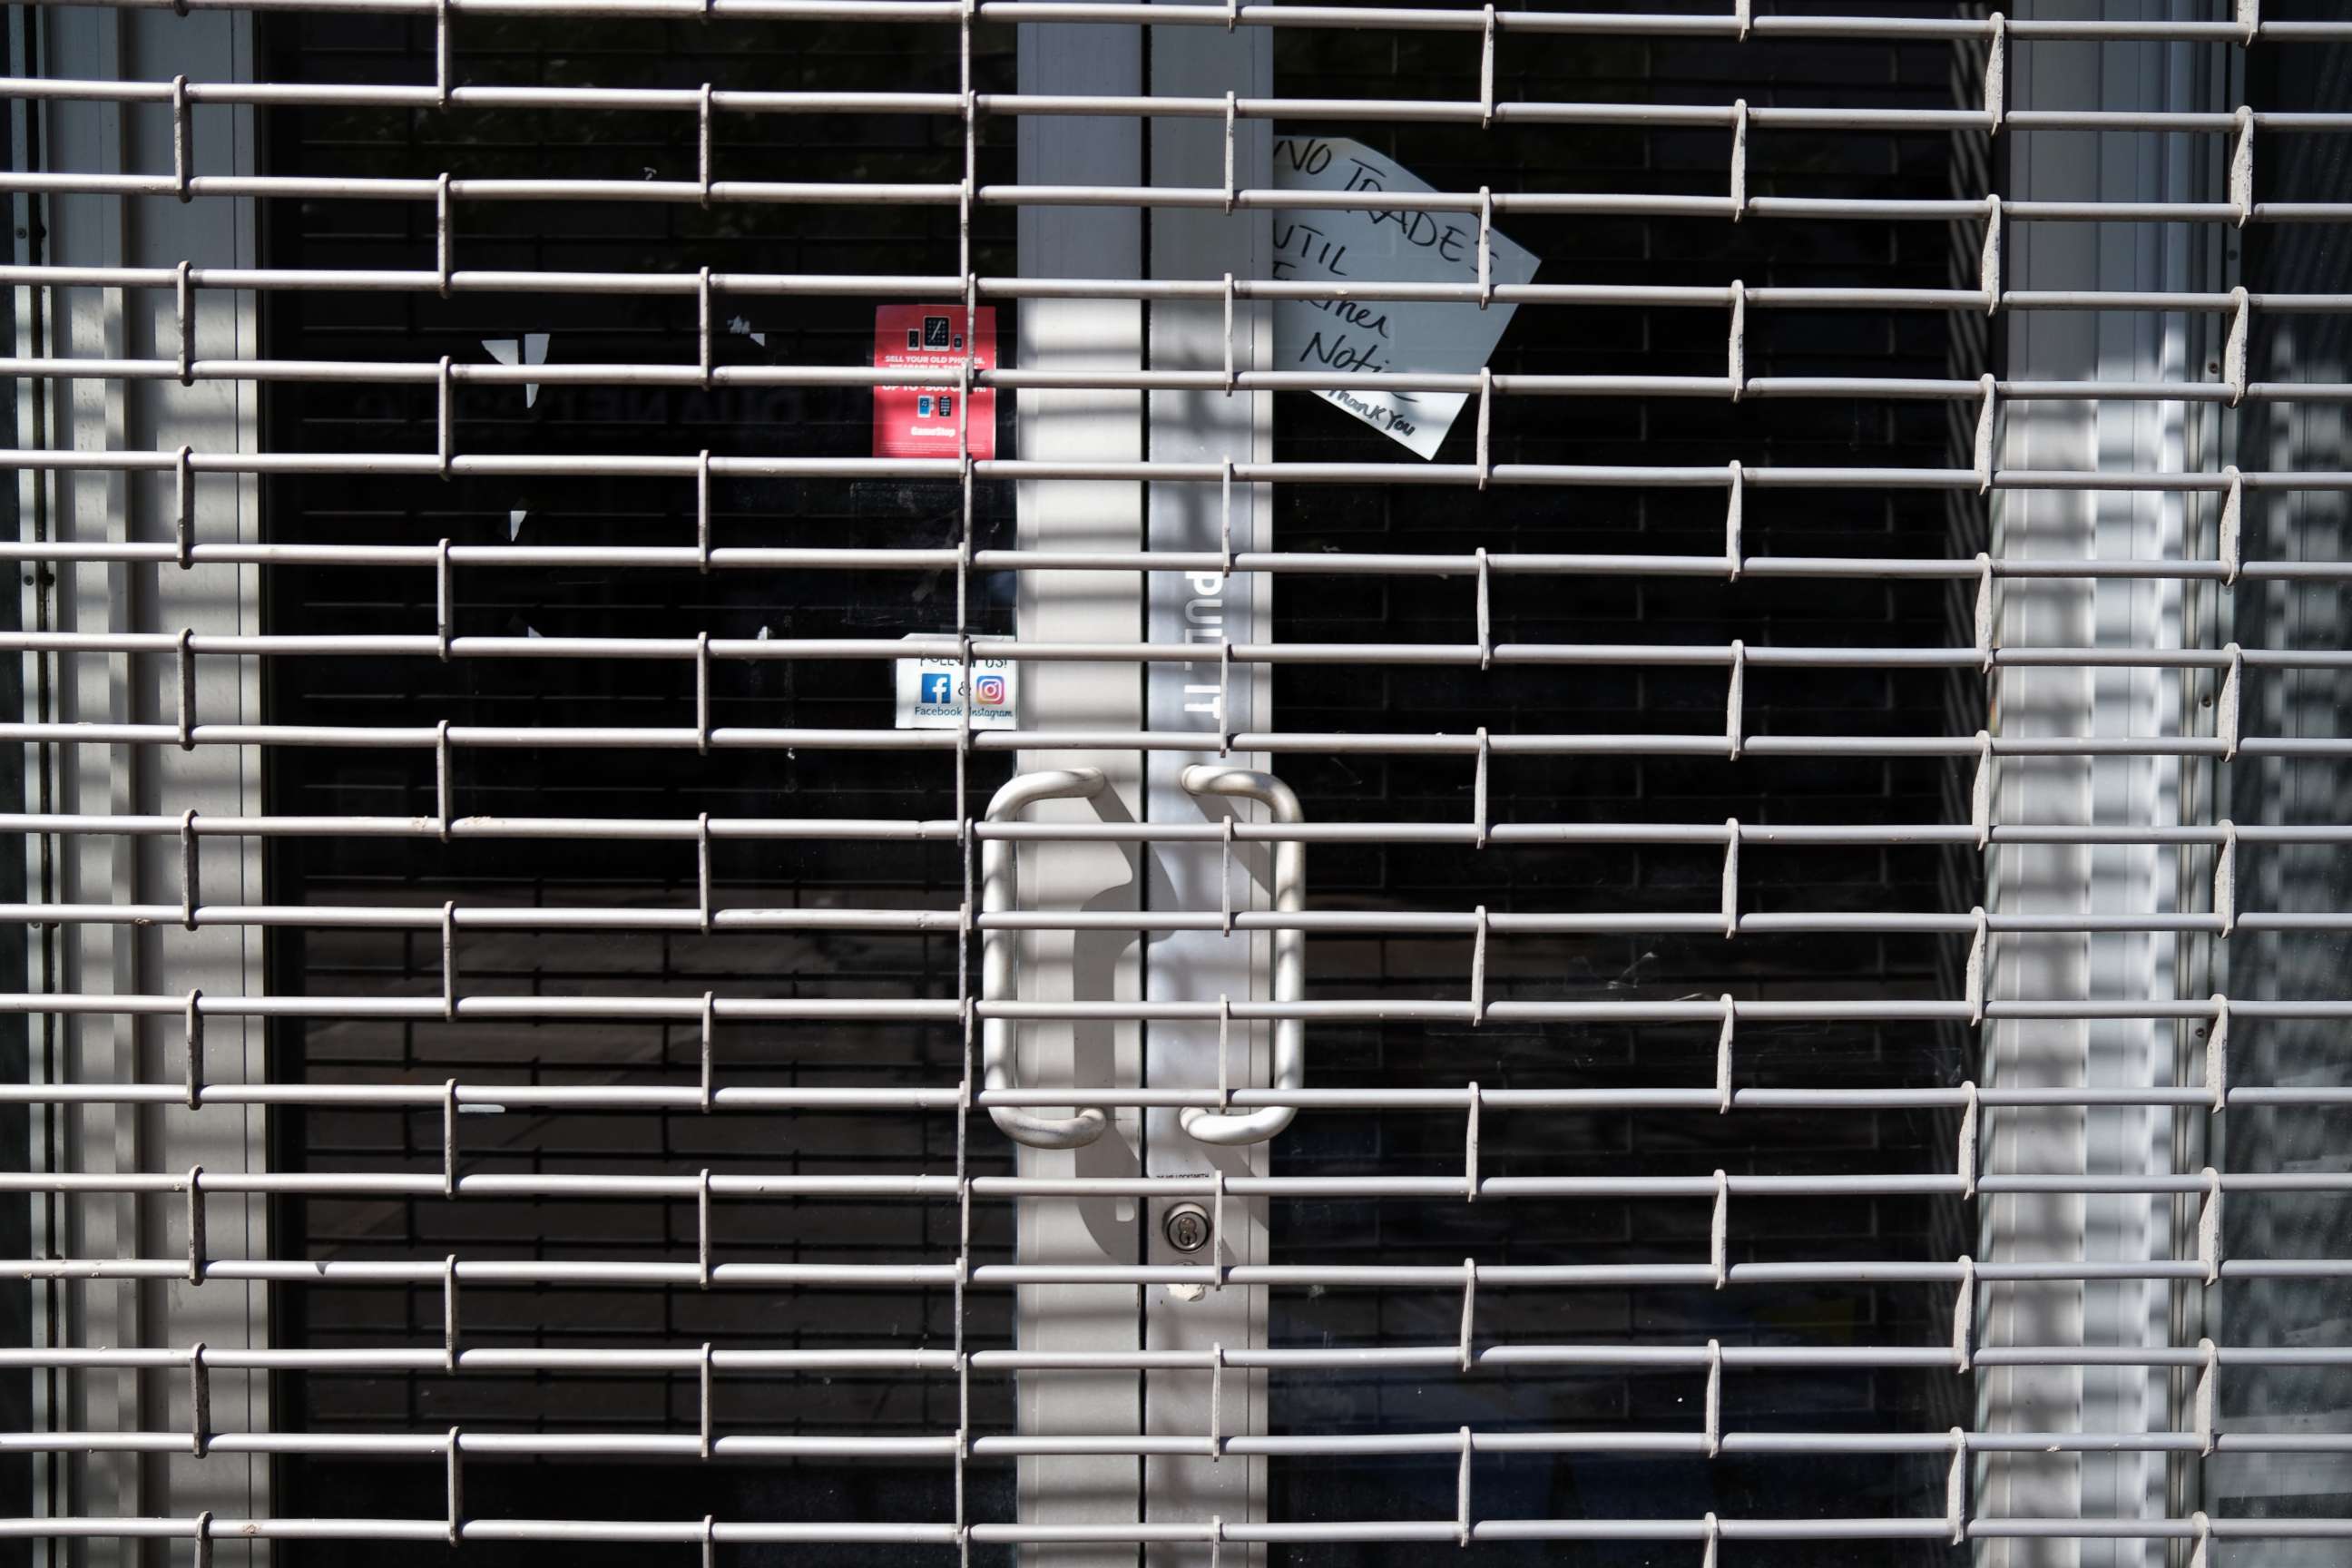 PHOTO: A metal grill covers the entrance of a closed business in the Brooklyn borough of New York, July 21, 2020.